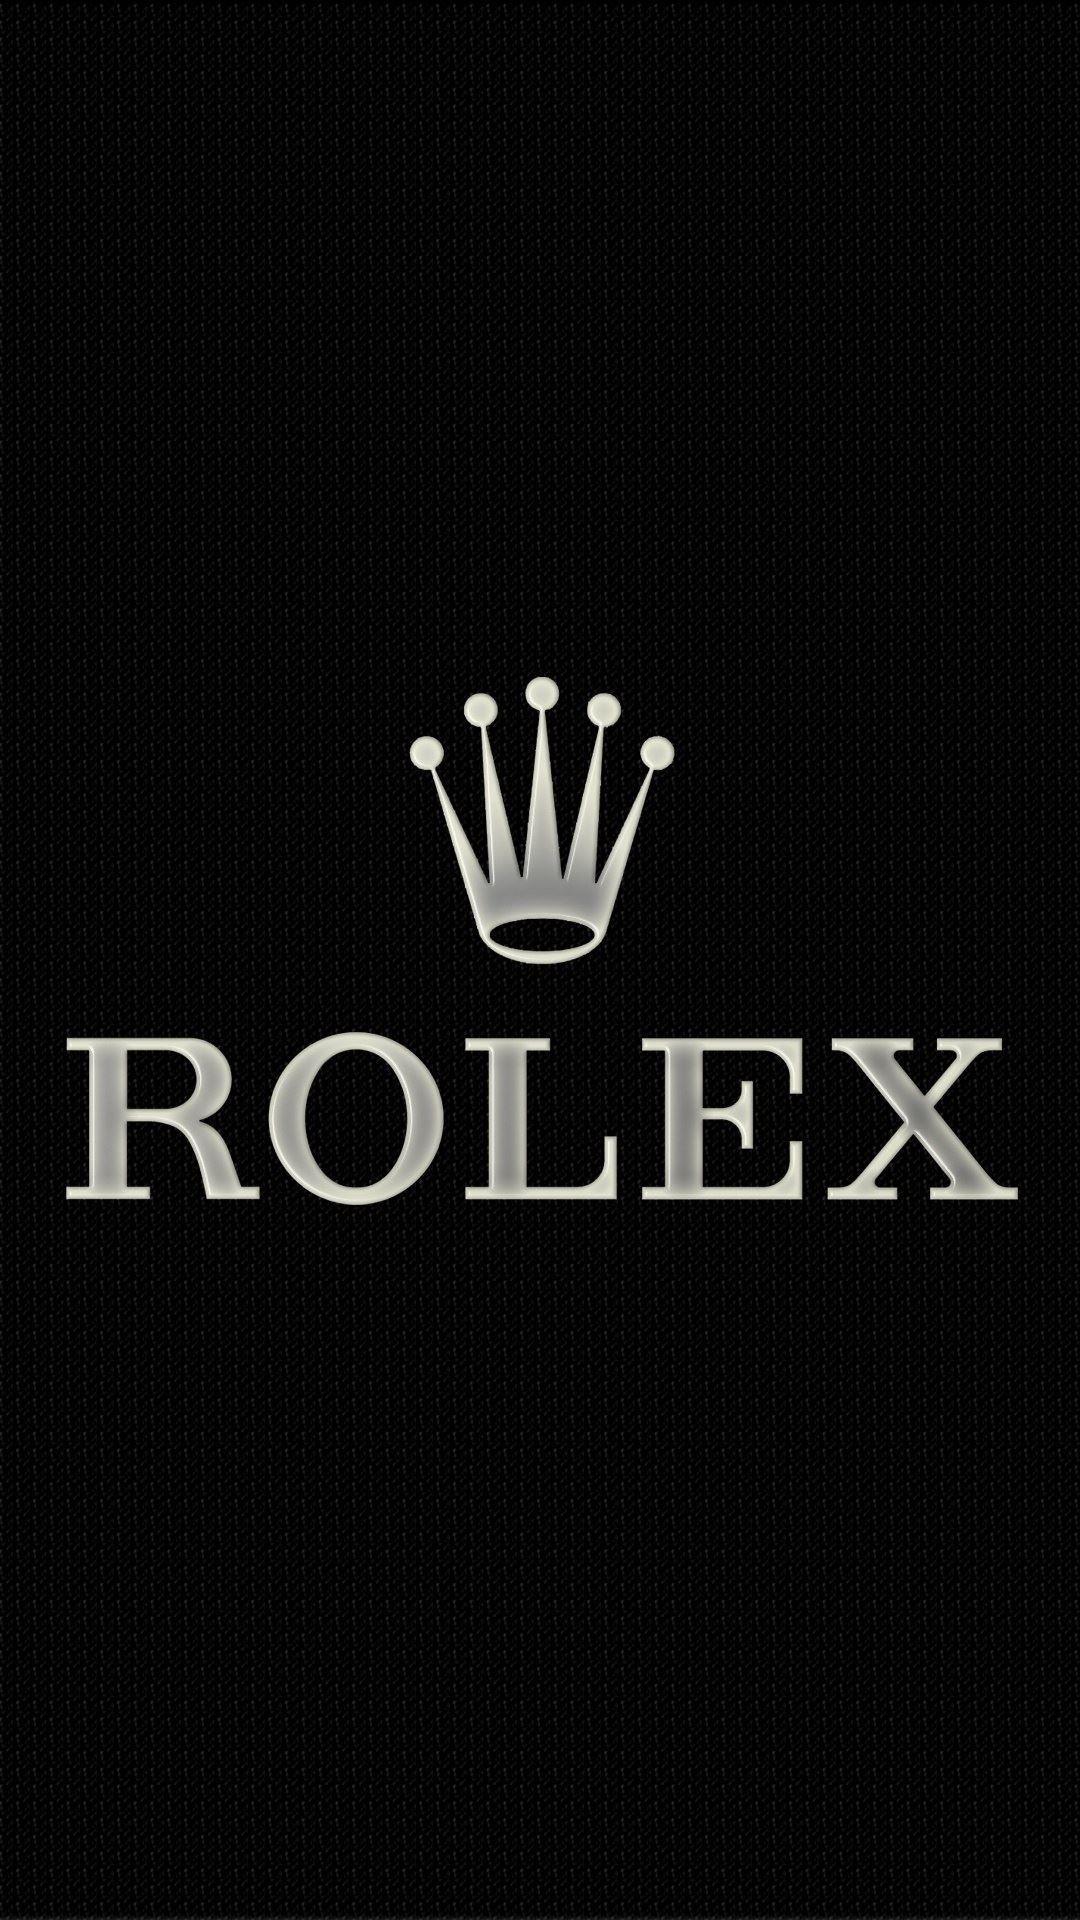 Rolex Logo htc one wallpaper, free and easy to download